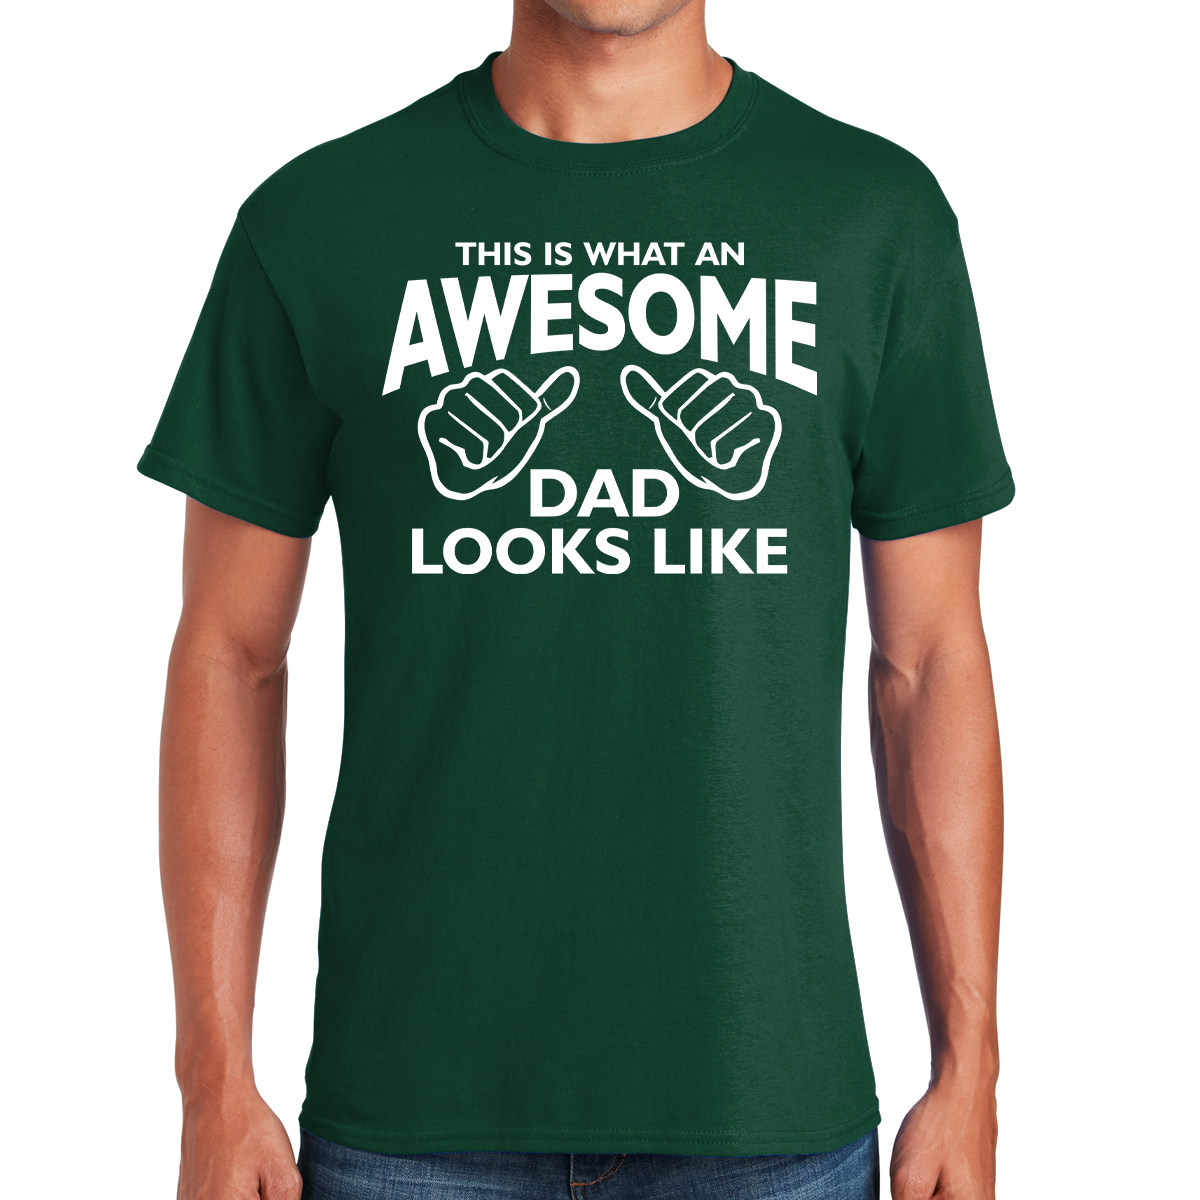 This Is What an Awesome Dad Looks Like Awesome Dad T-shirt